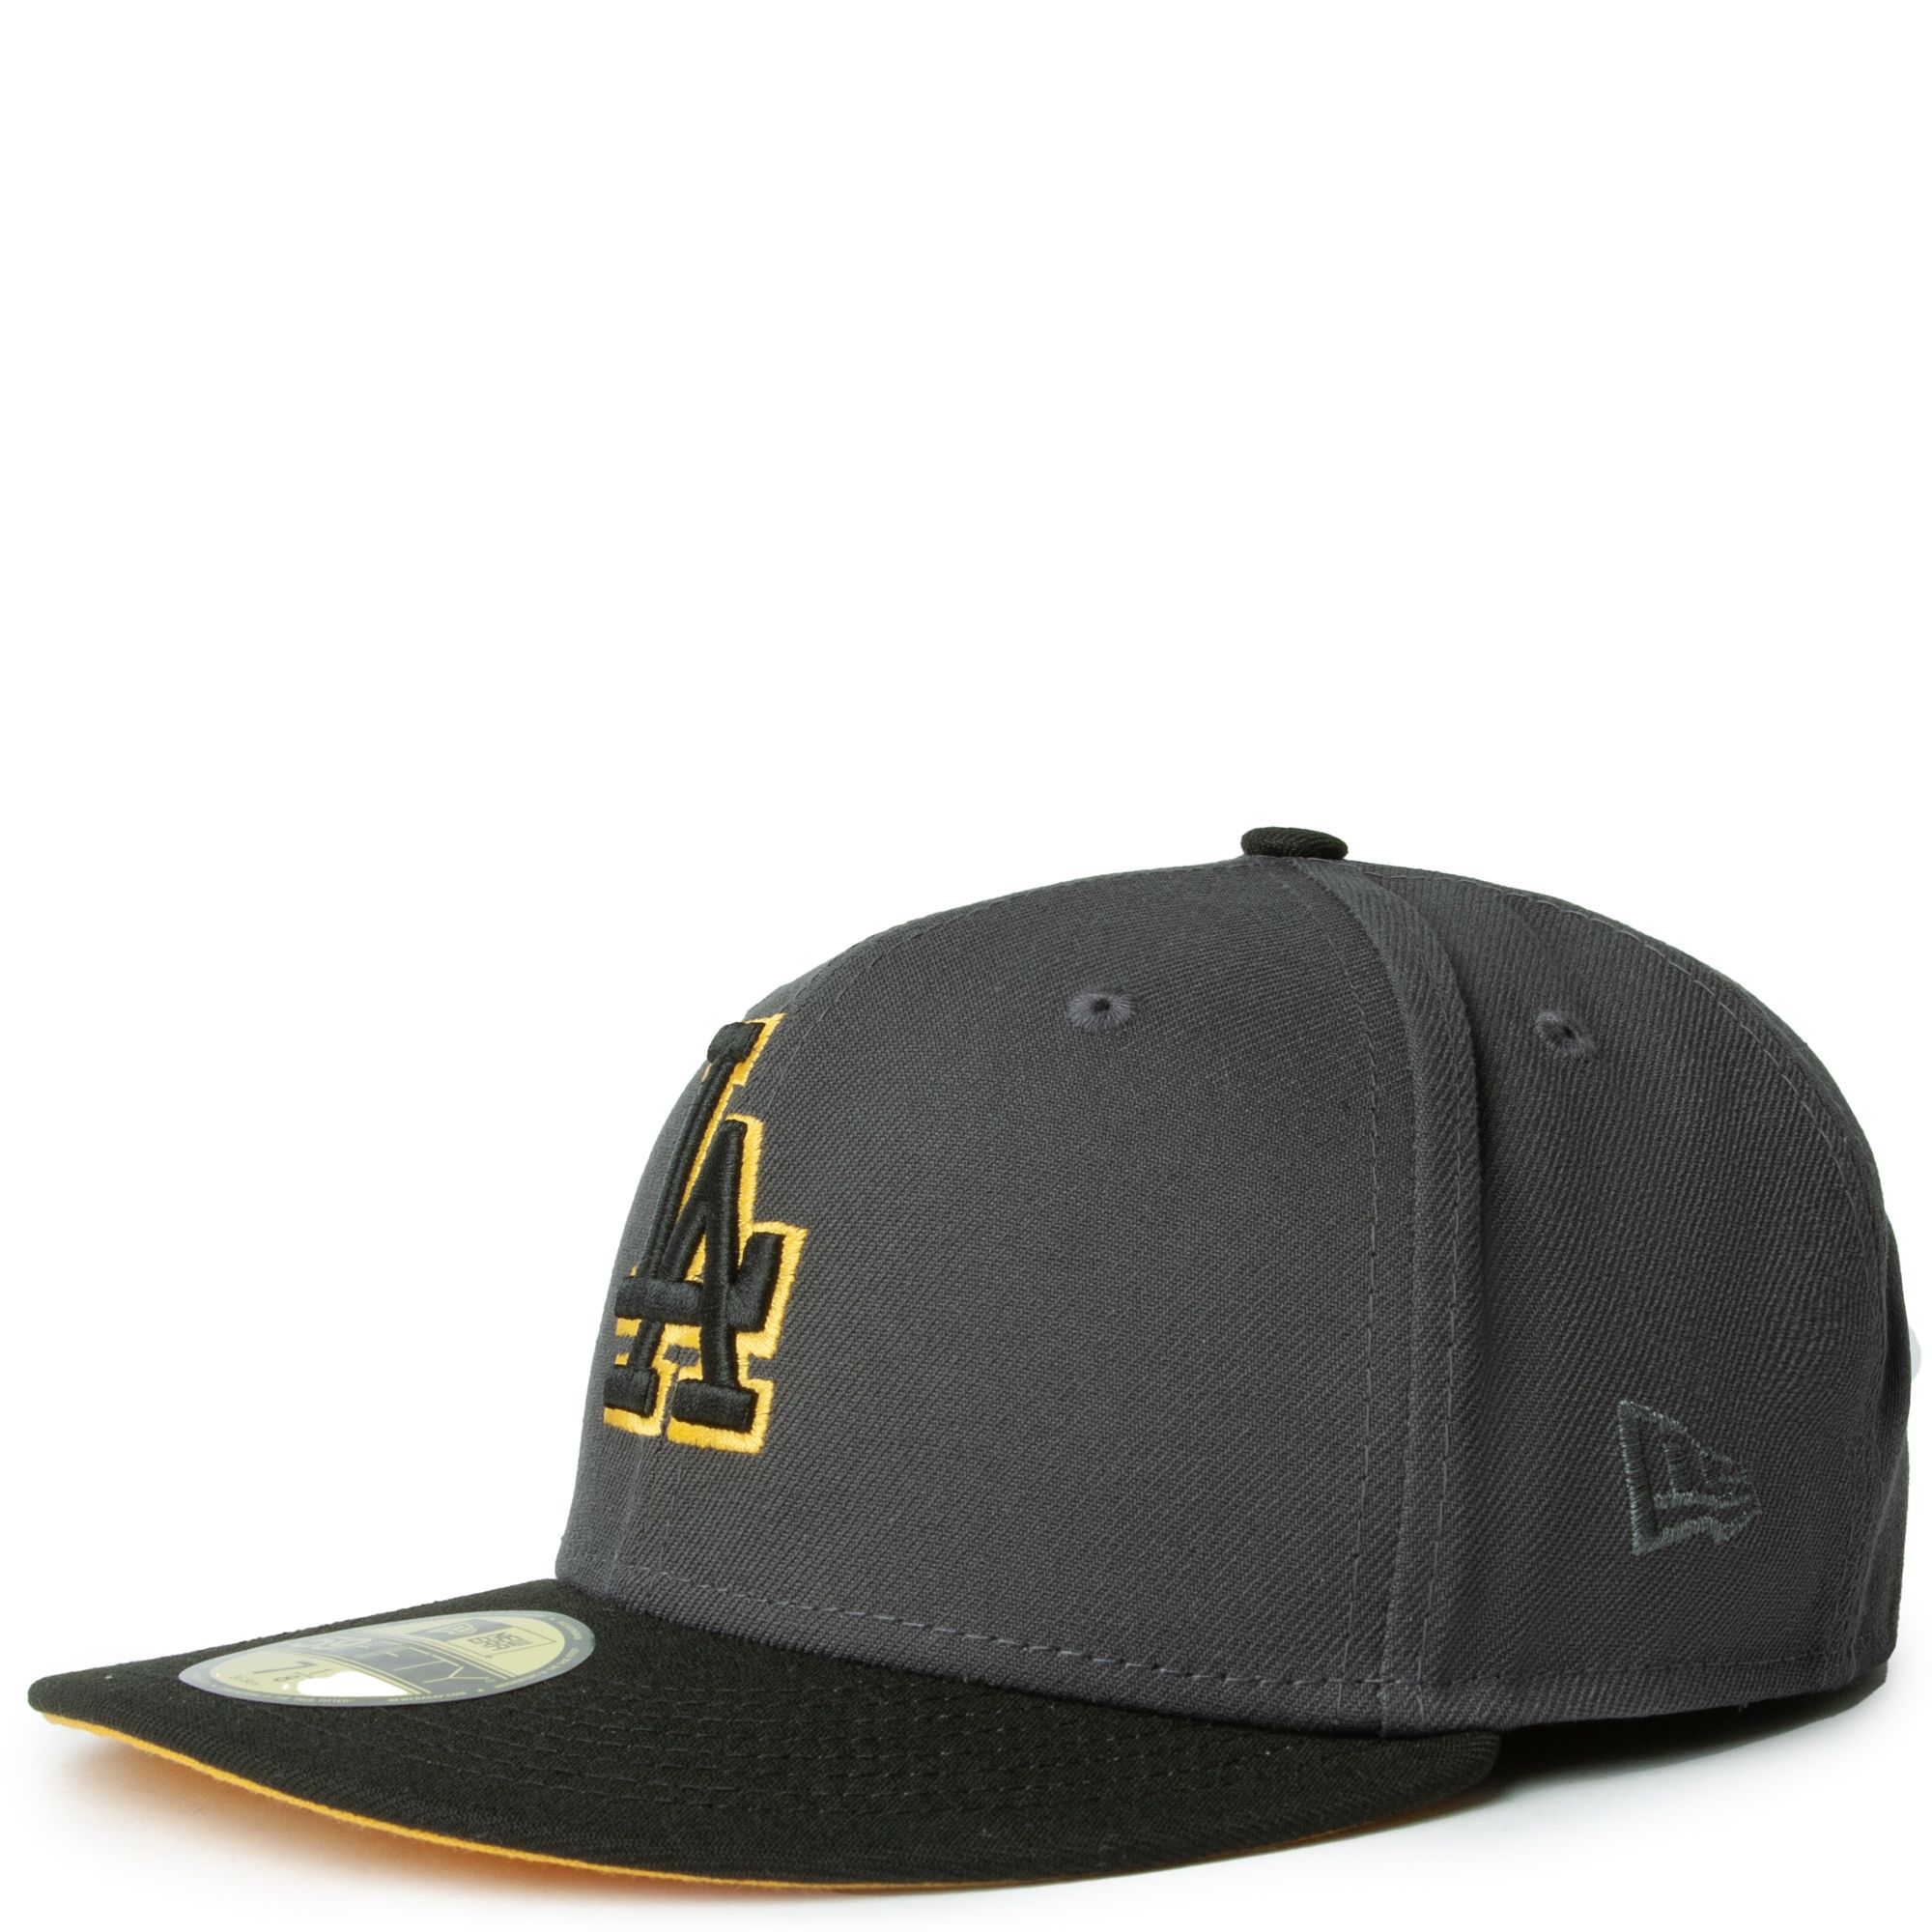 New Era Los Angeles Dodgers 9/11 Memorial 59Fifty Fitted Hat